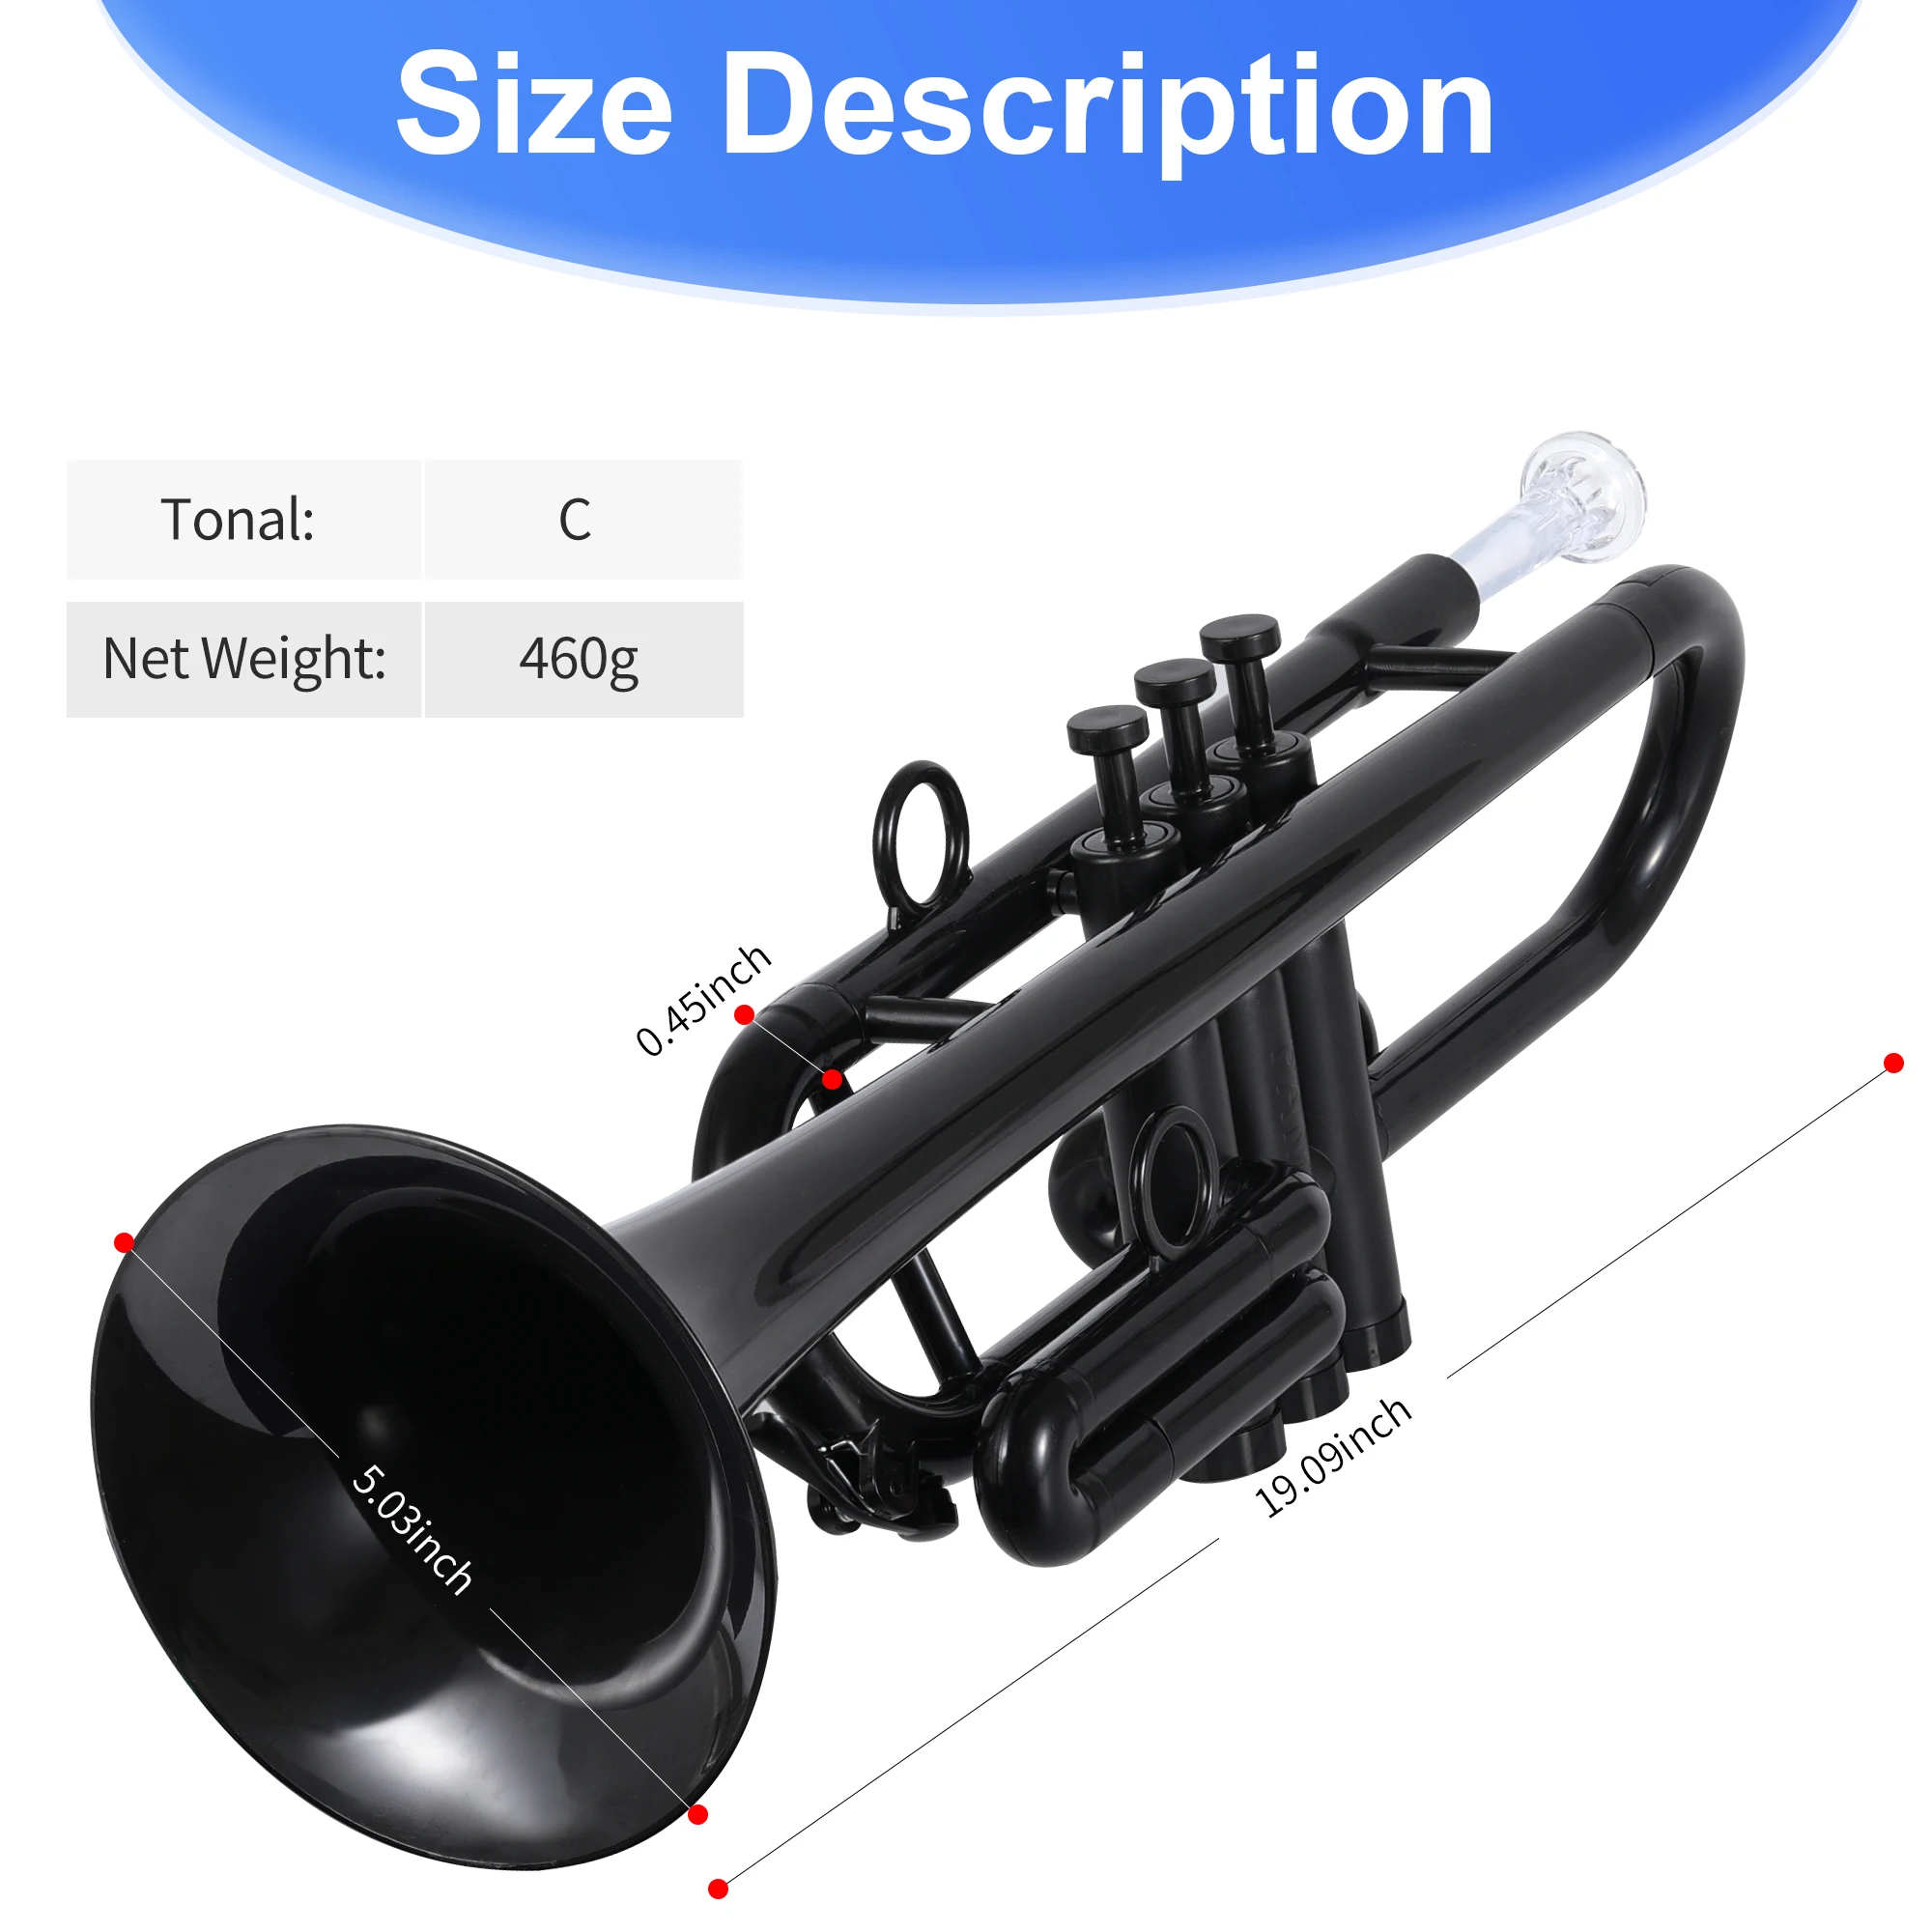 Standard Student Plastic Trumpet C Key for Practice with Trumpet Mute and Carry Bag Musical Instrument